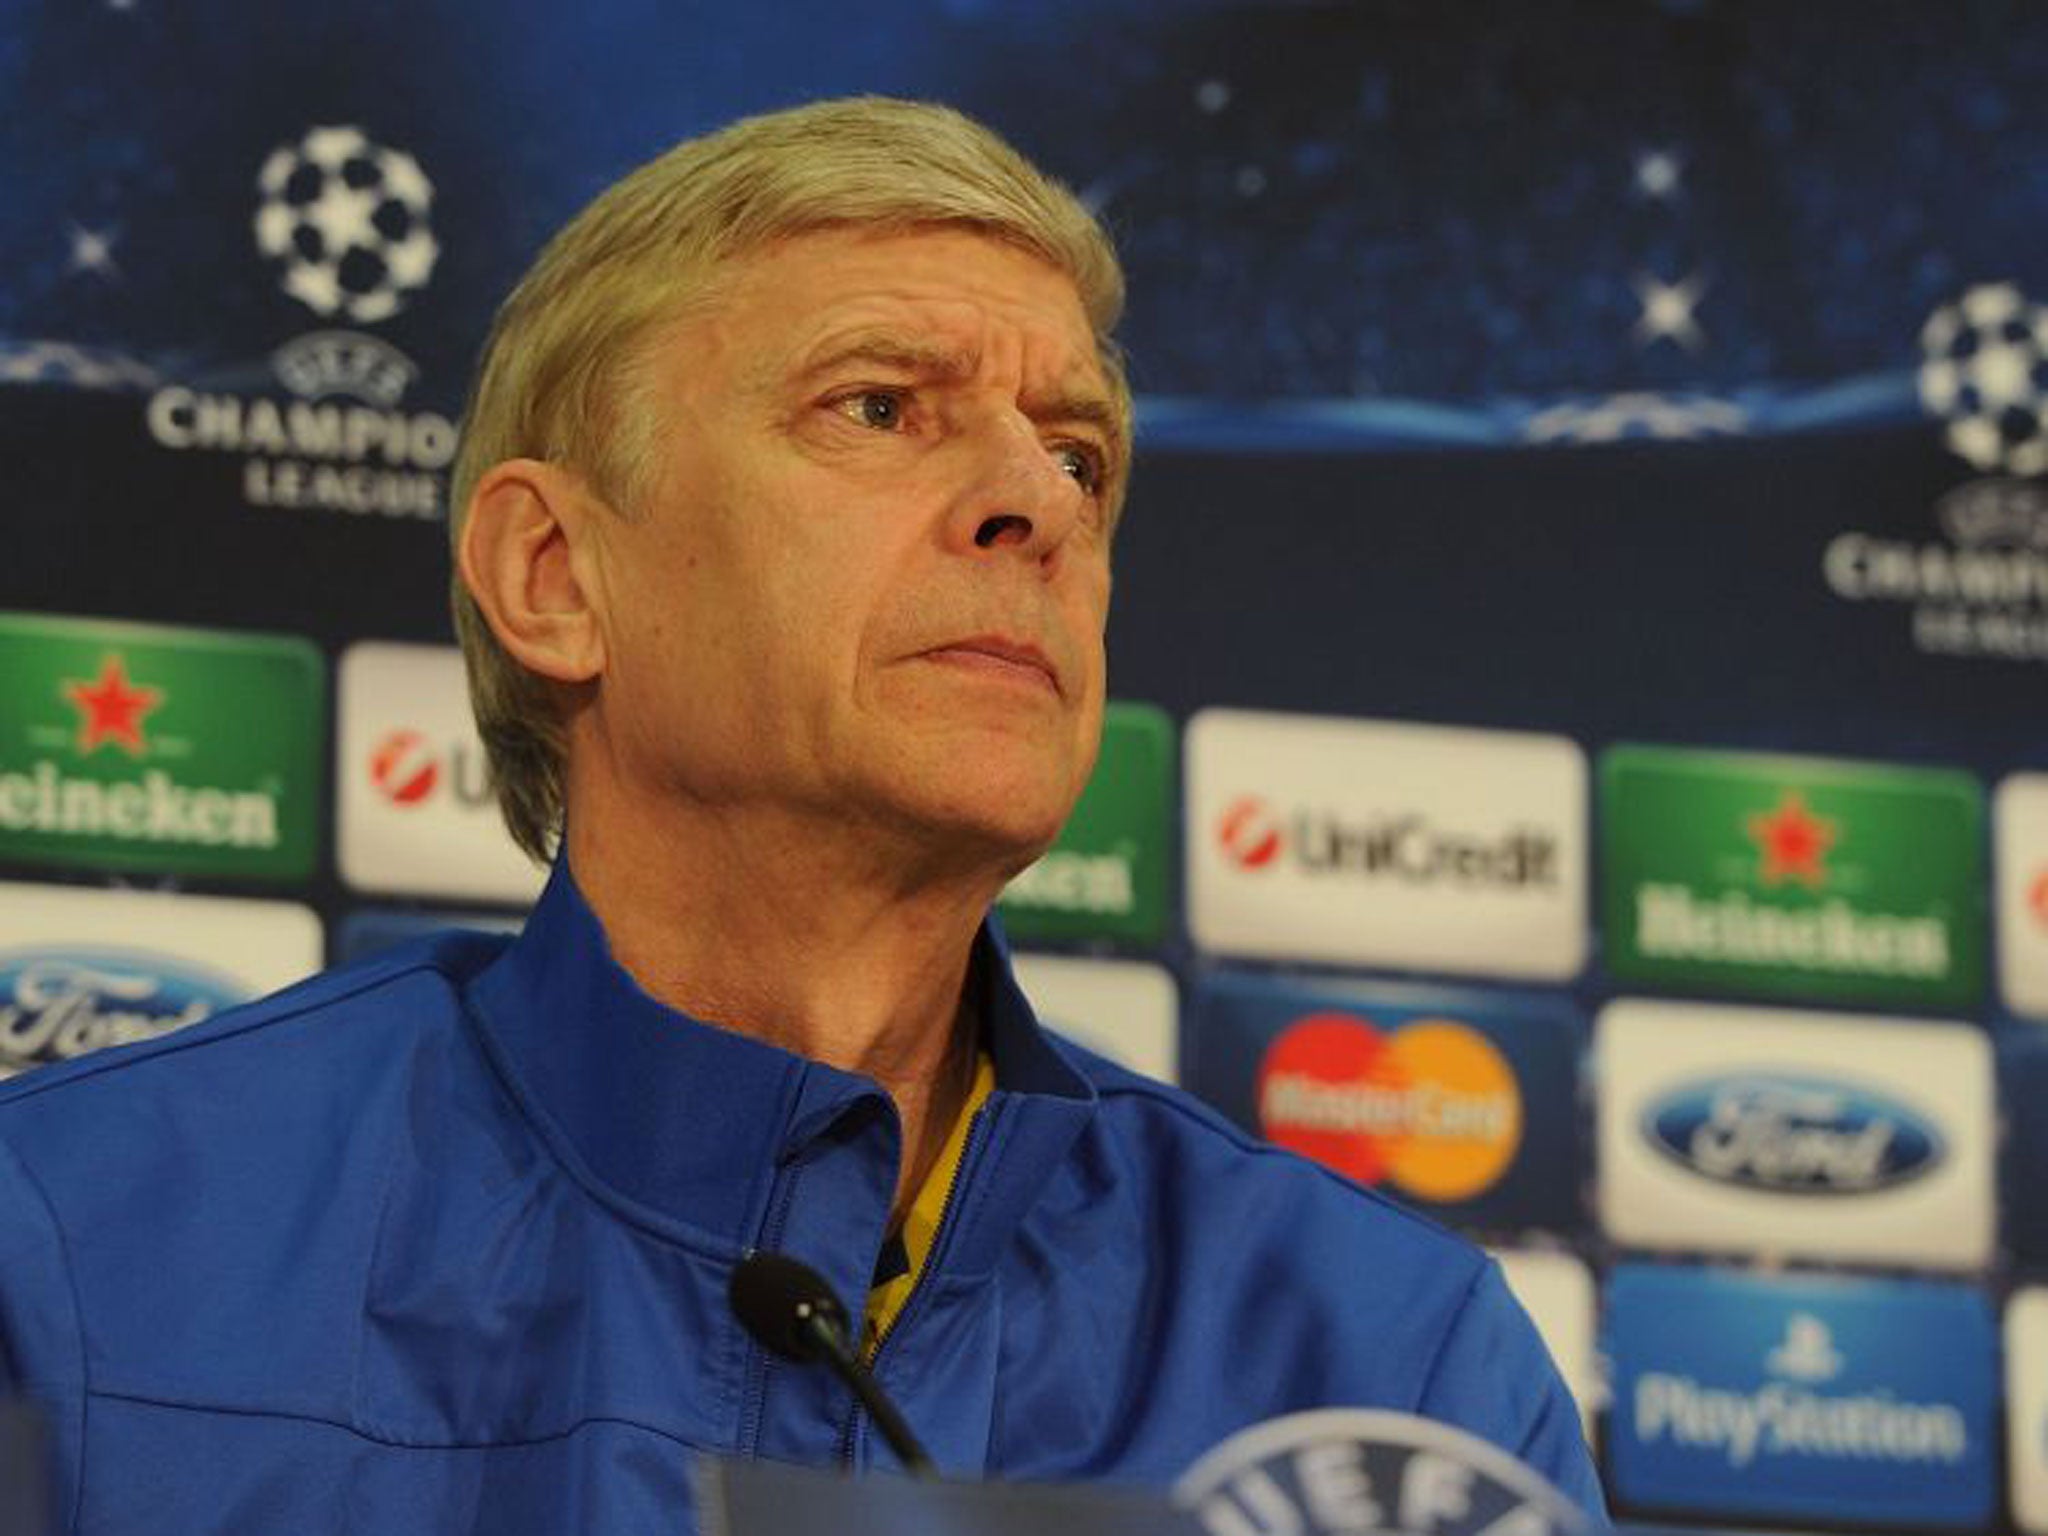 Arsène Wenger takes his side to Germany needing to reverse a 2-0 defeat in the first leg against Bayern